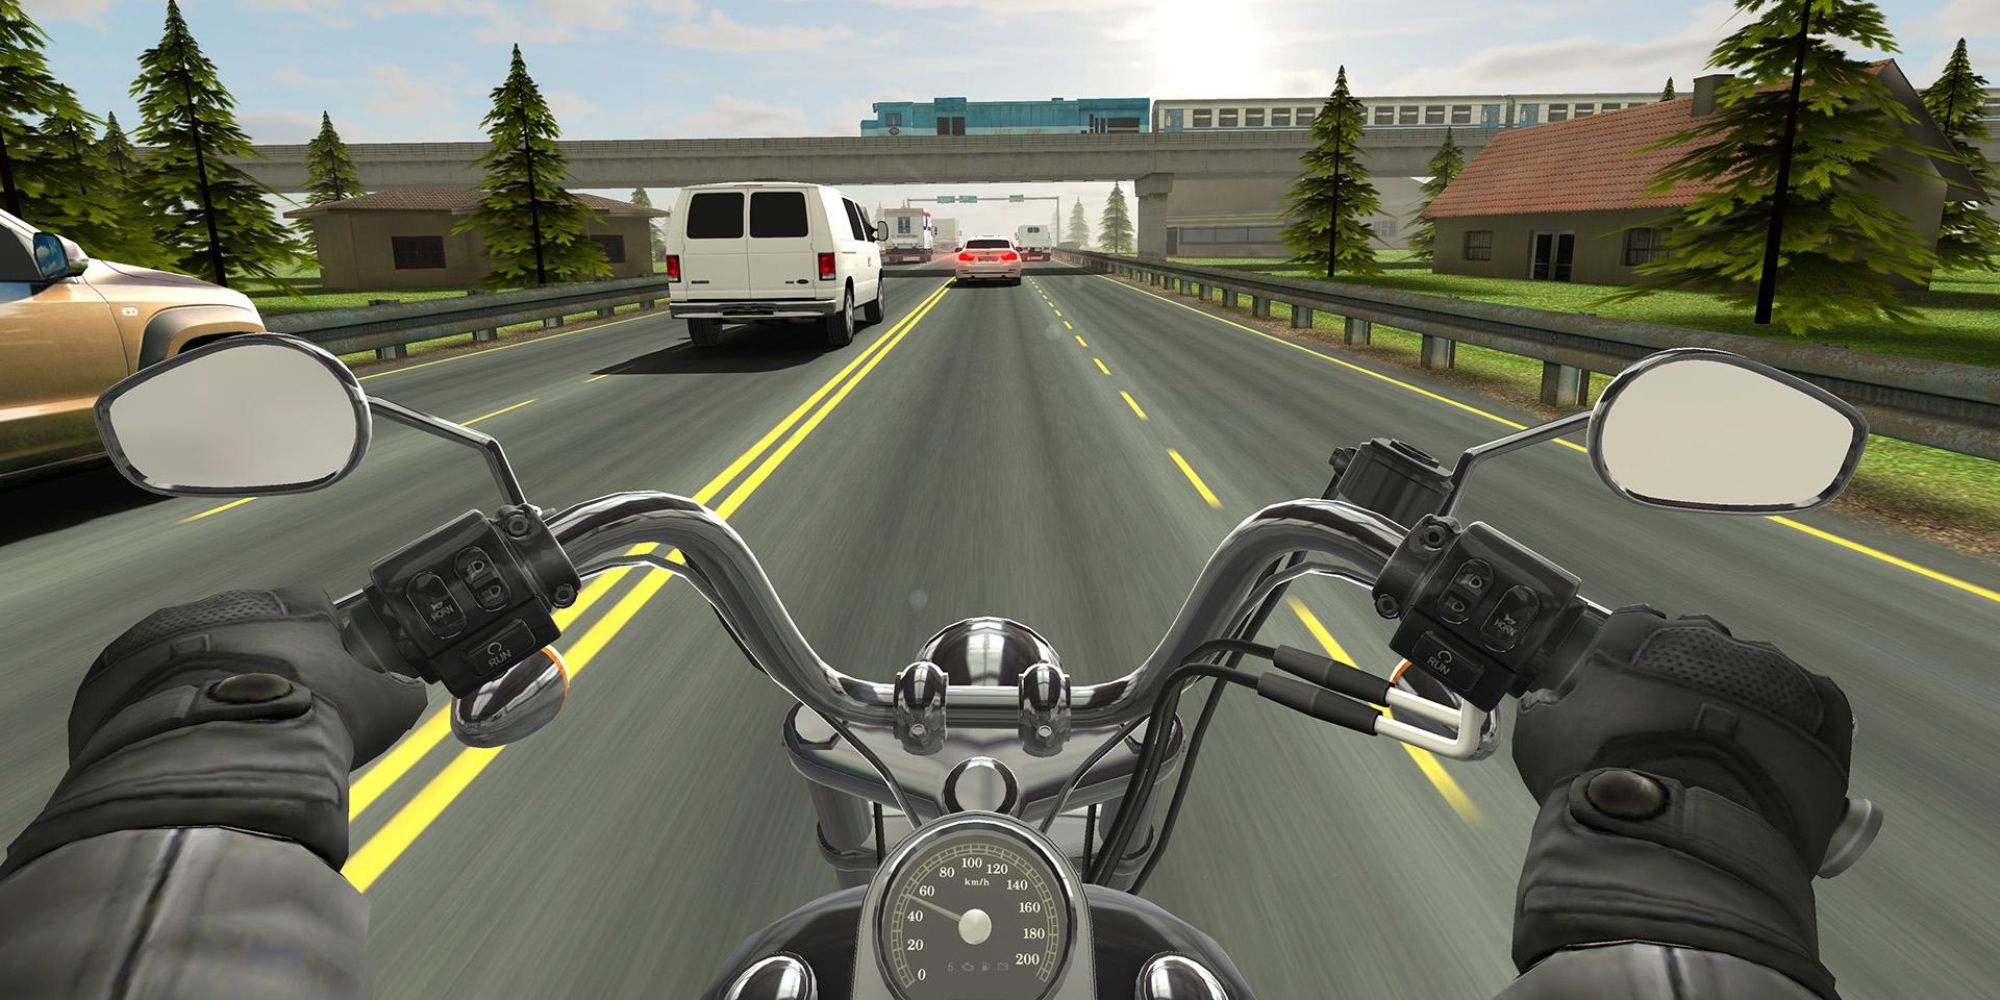 Best Racing Games on Mobile - Traffic Rider - Player rides past traffic smoothly